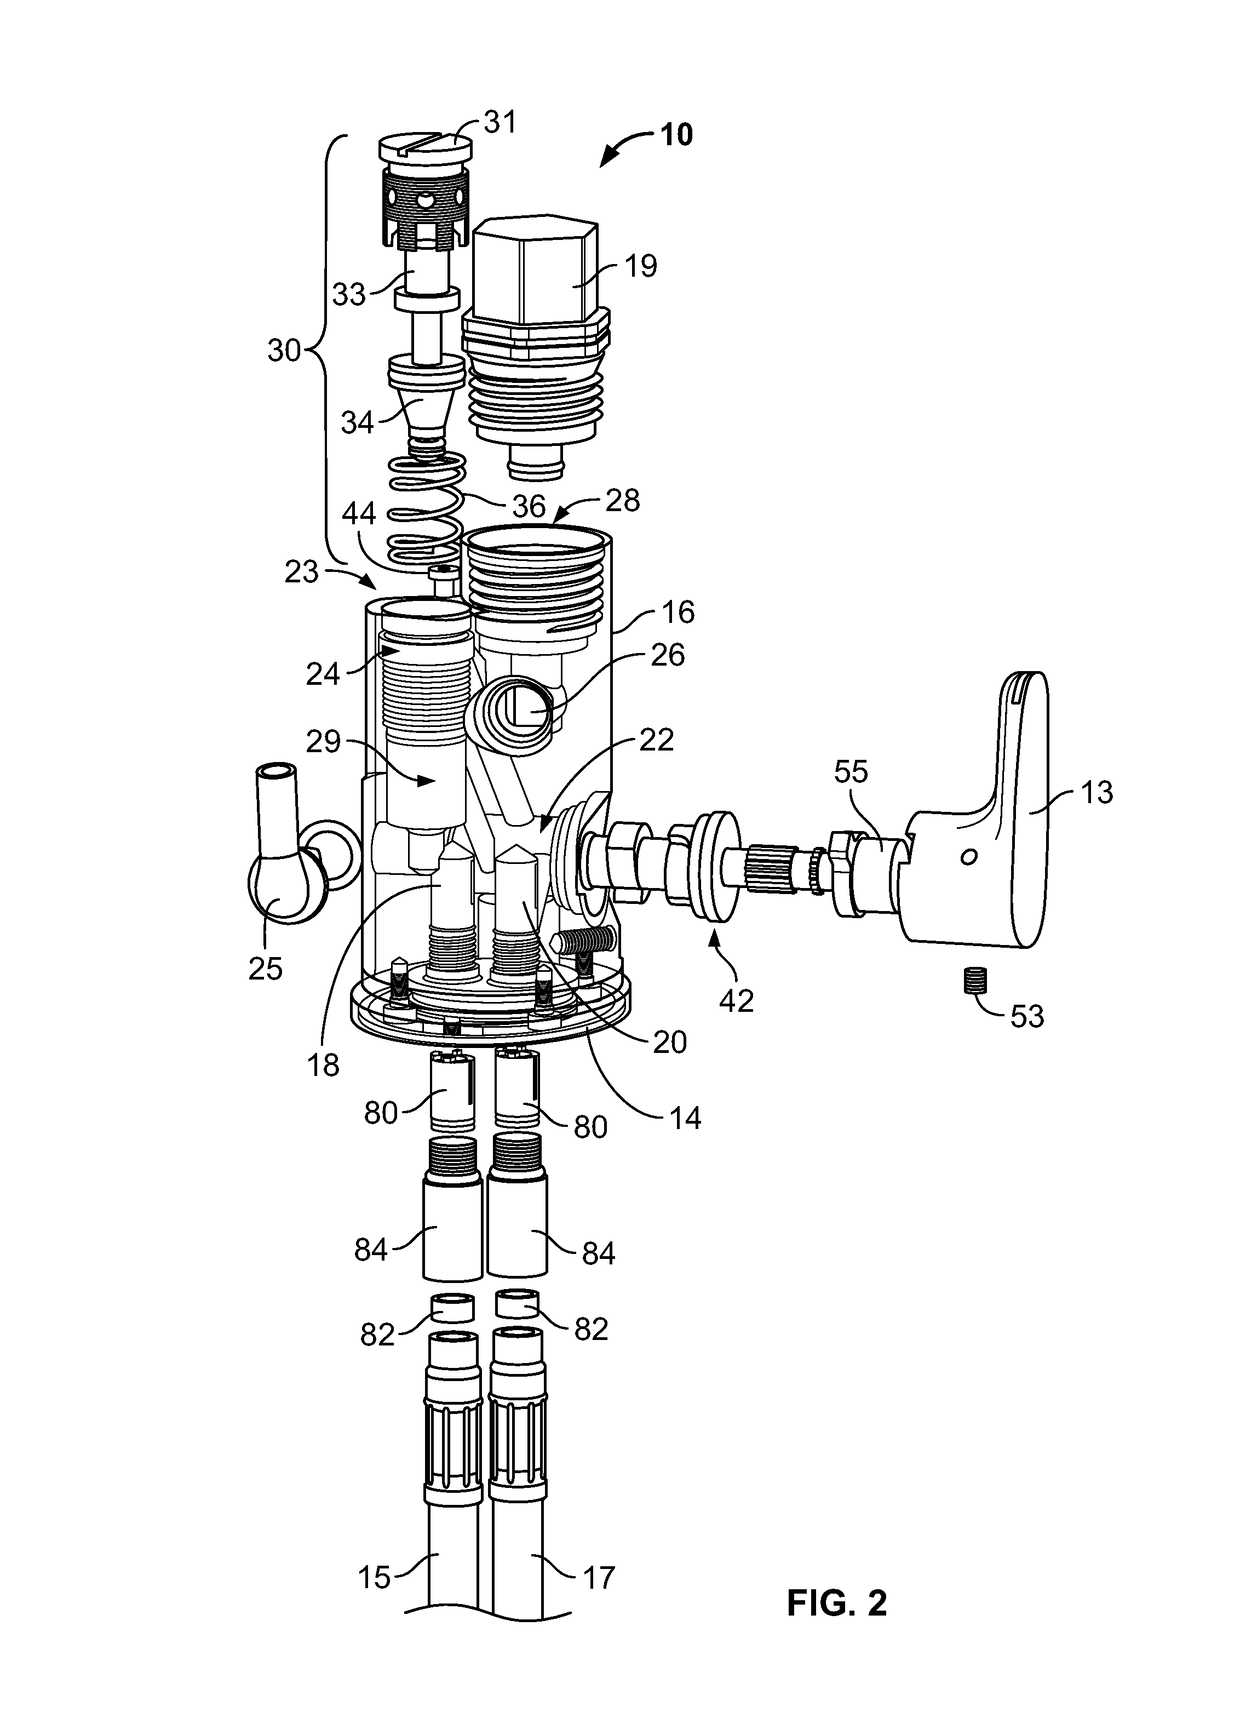 Faucet assembly with integrated anti-scald device